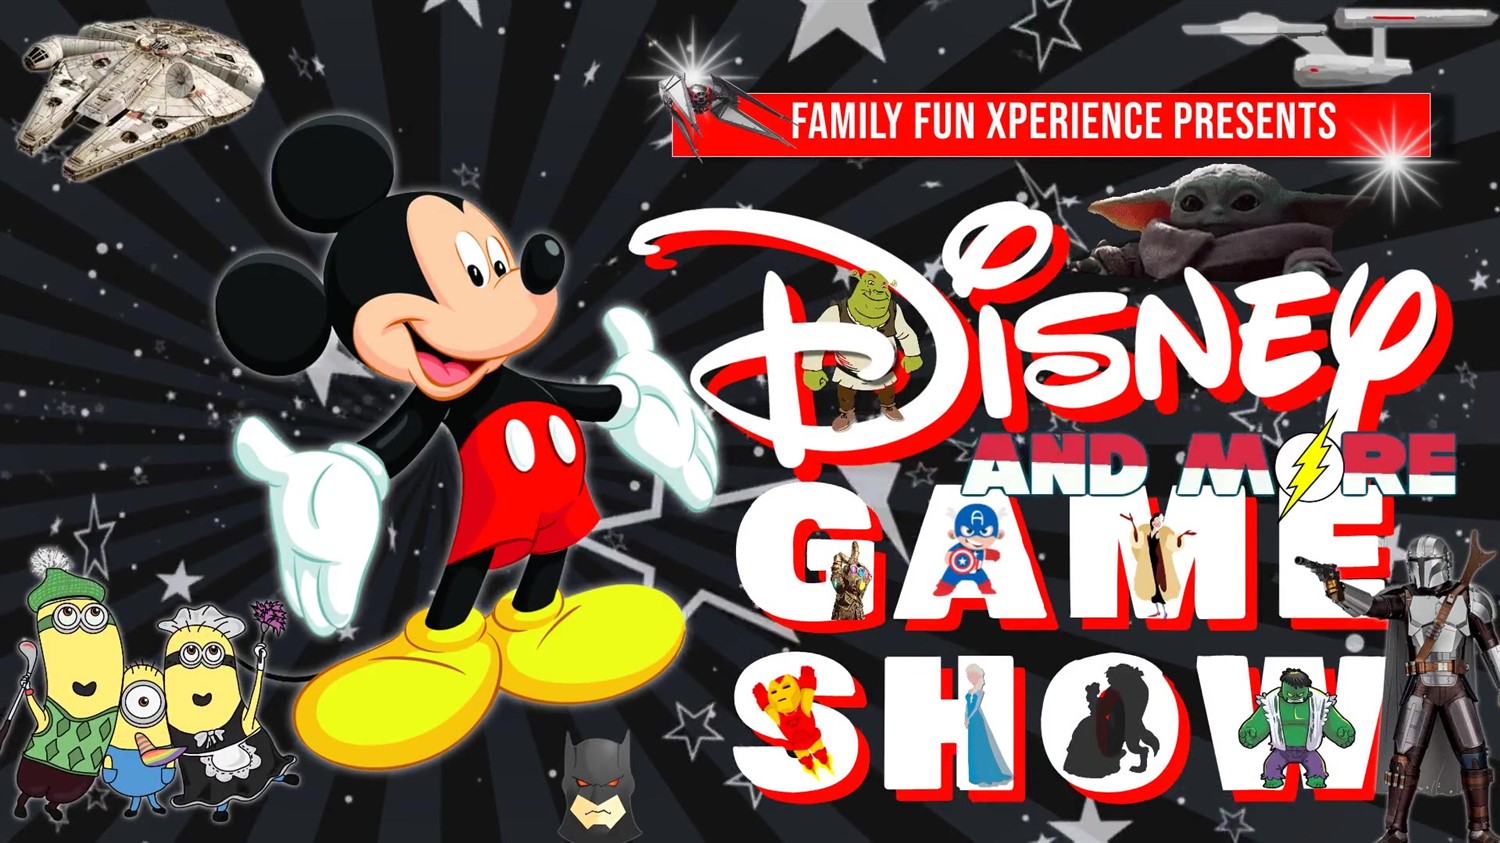 DISNEY & MORE GAME SHOW Animation, movies, sci-fi, superheroes, & much more! on Aug 16, 19:00@FFX Theatre - Pick a seat, Buy tickets and Get information on Family Fun Xperience tickets.ffxshow.org